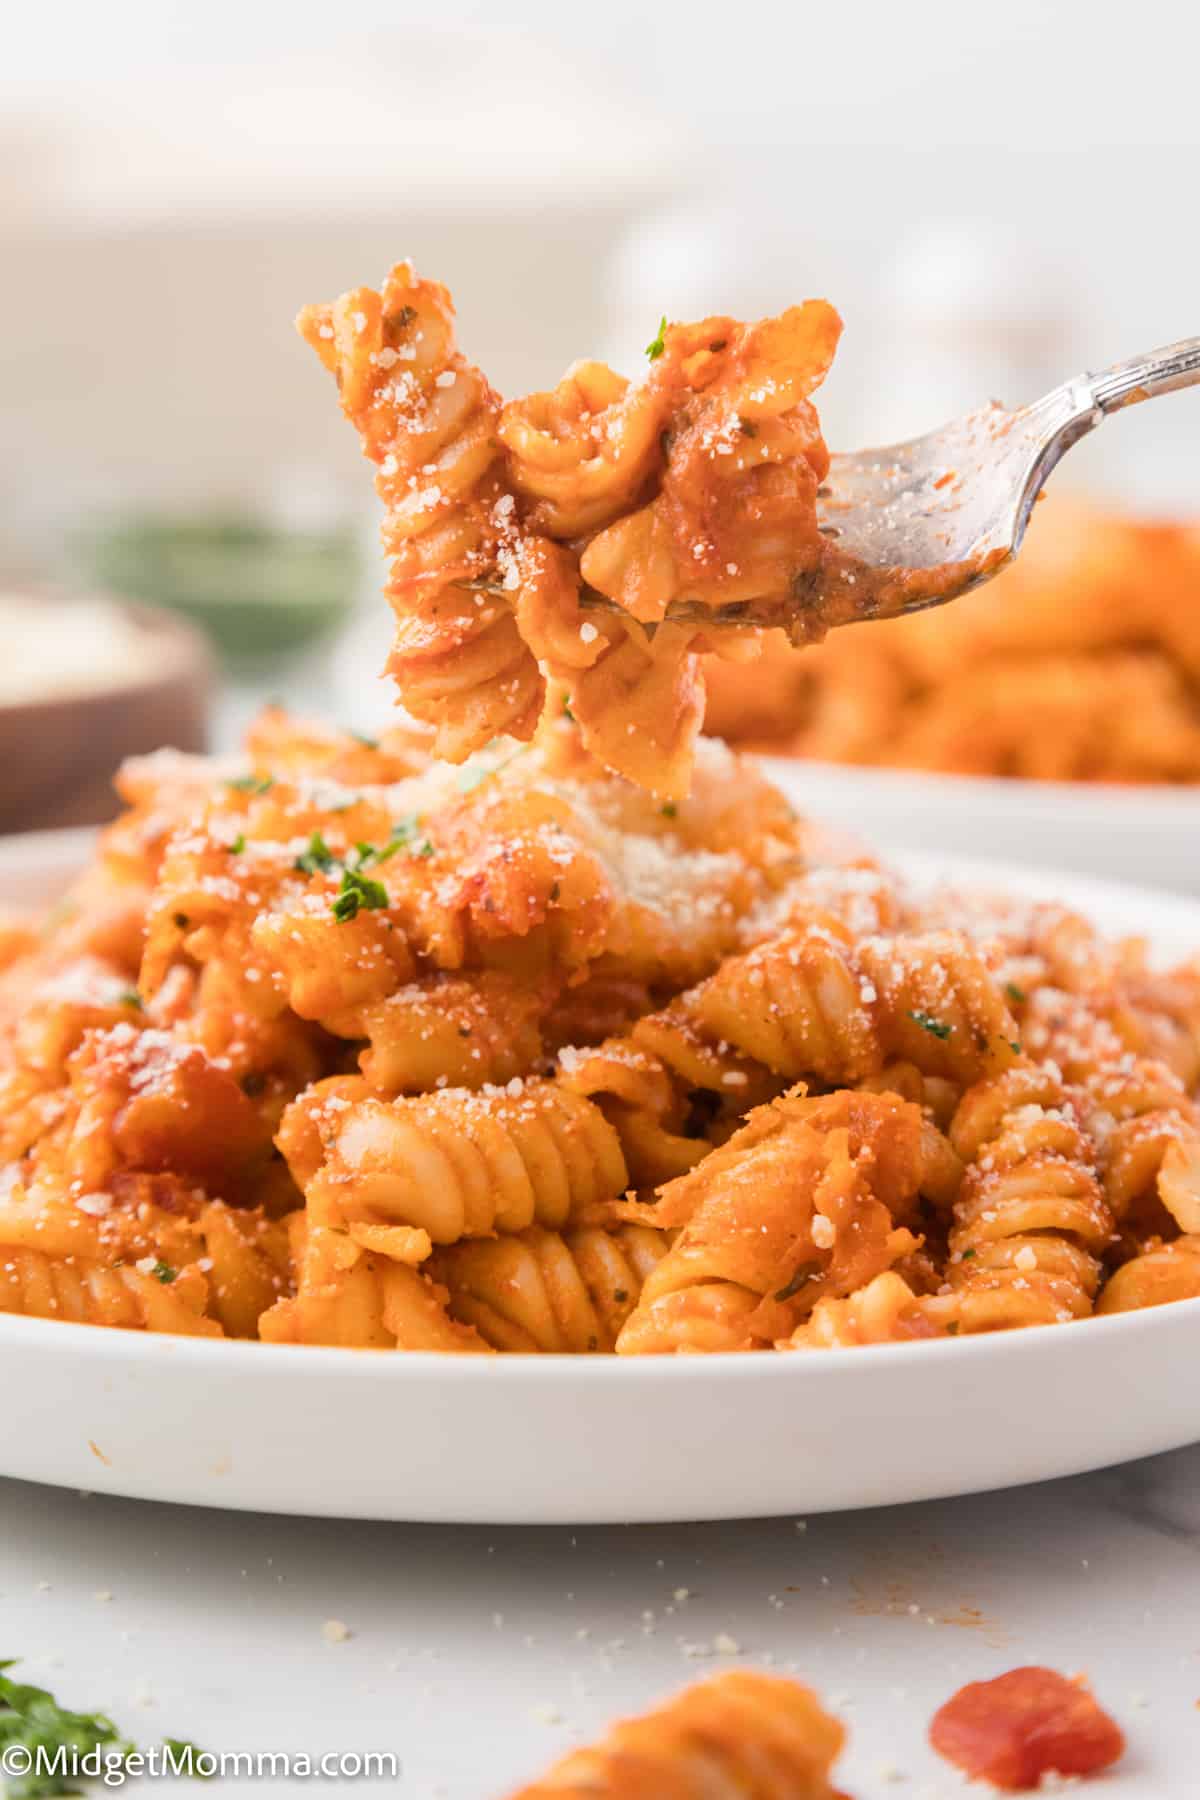 A fork lifting a portion of rotini pasta coated in tomato sauce and sprinkled with parmesan cheese.